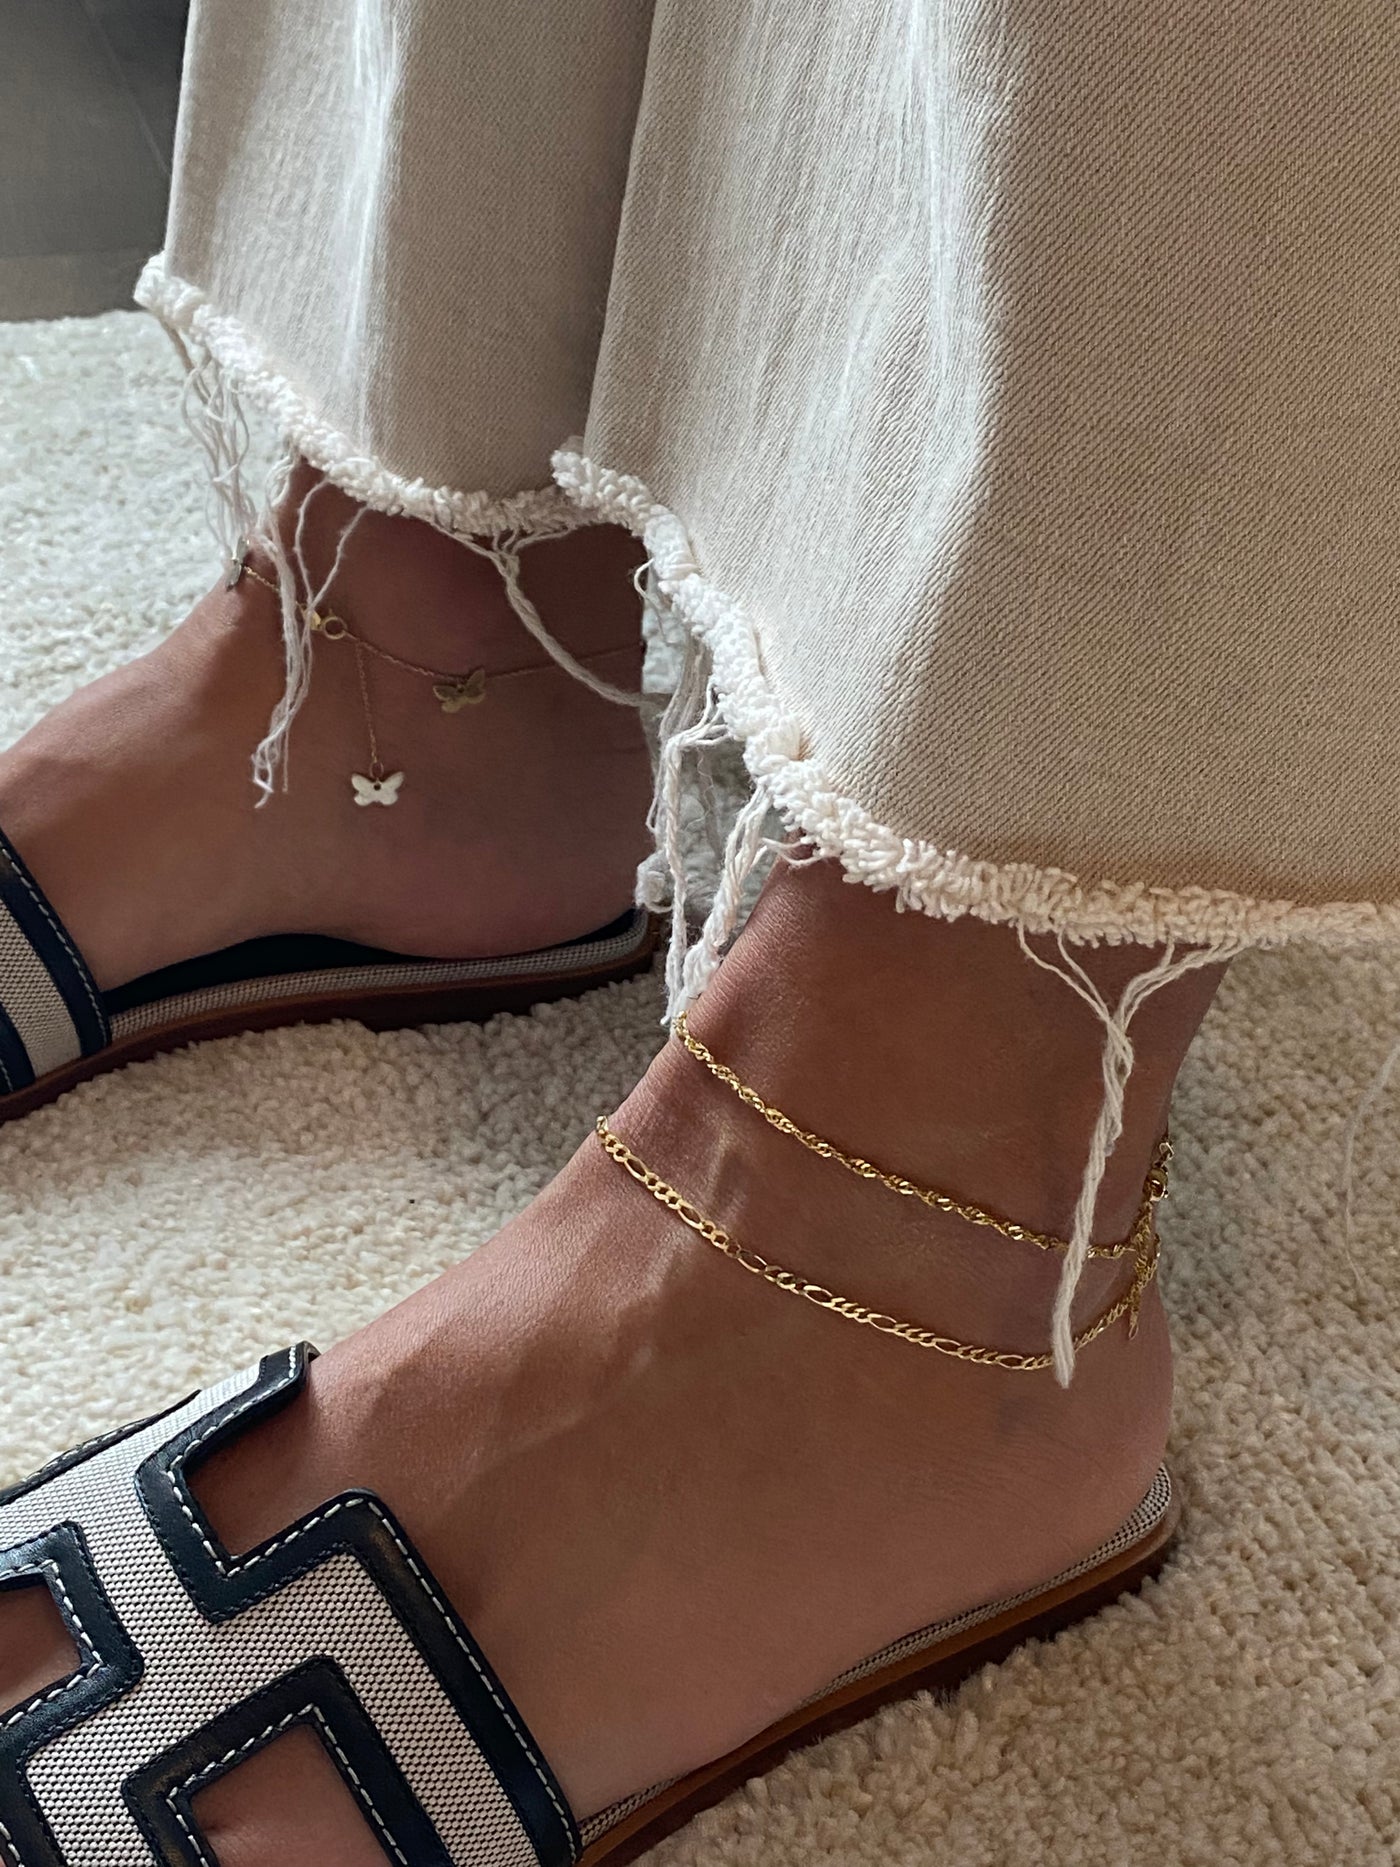 SORELLE - The Figaro Chain Anklet